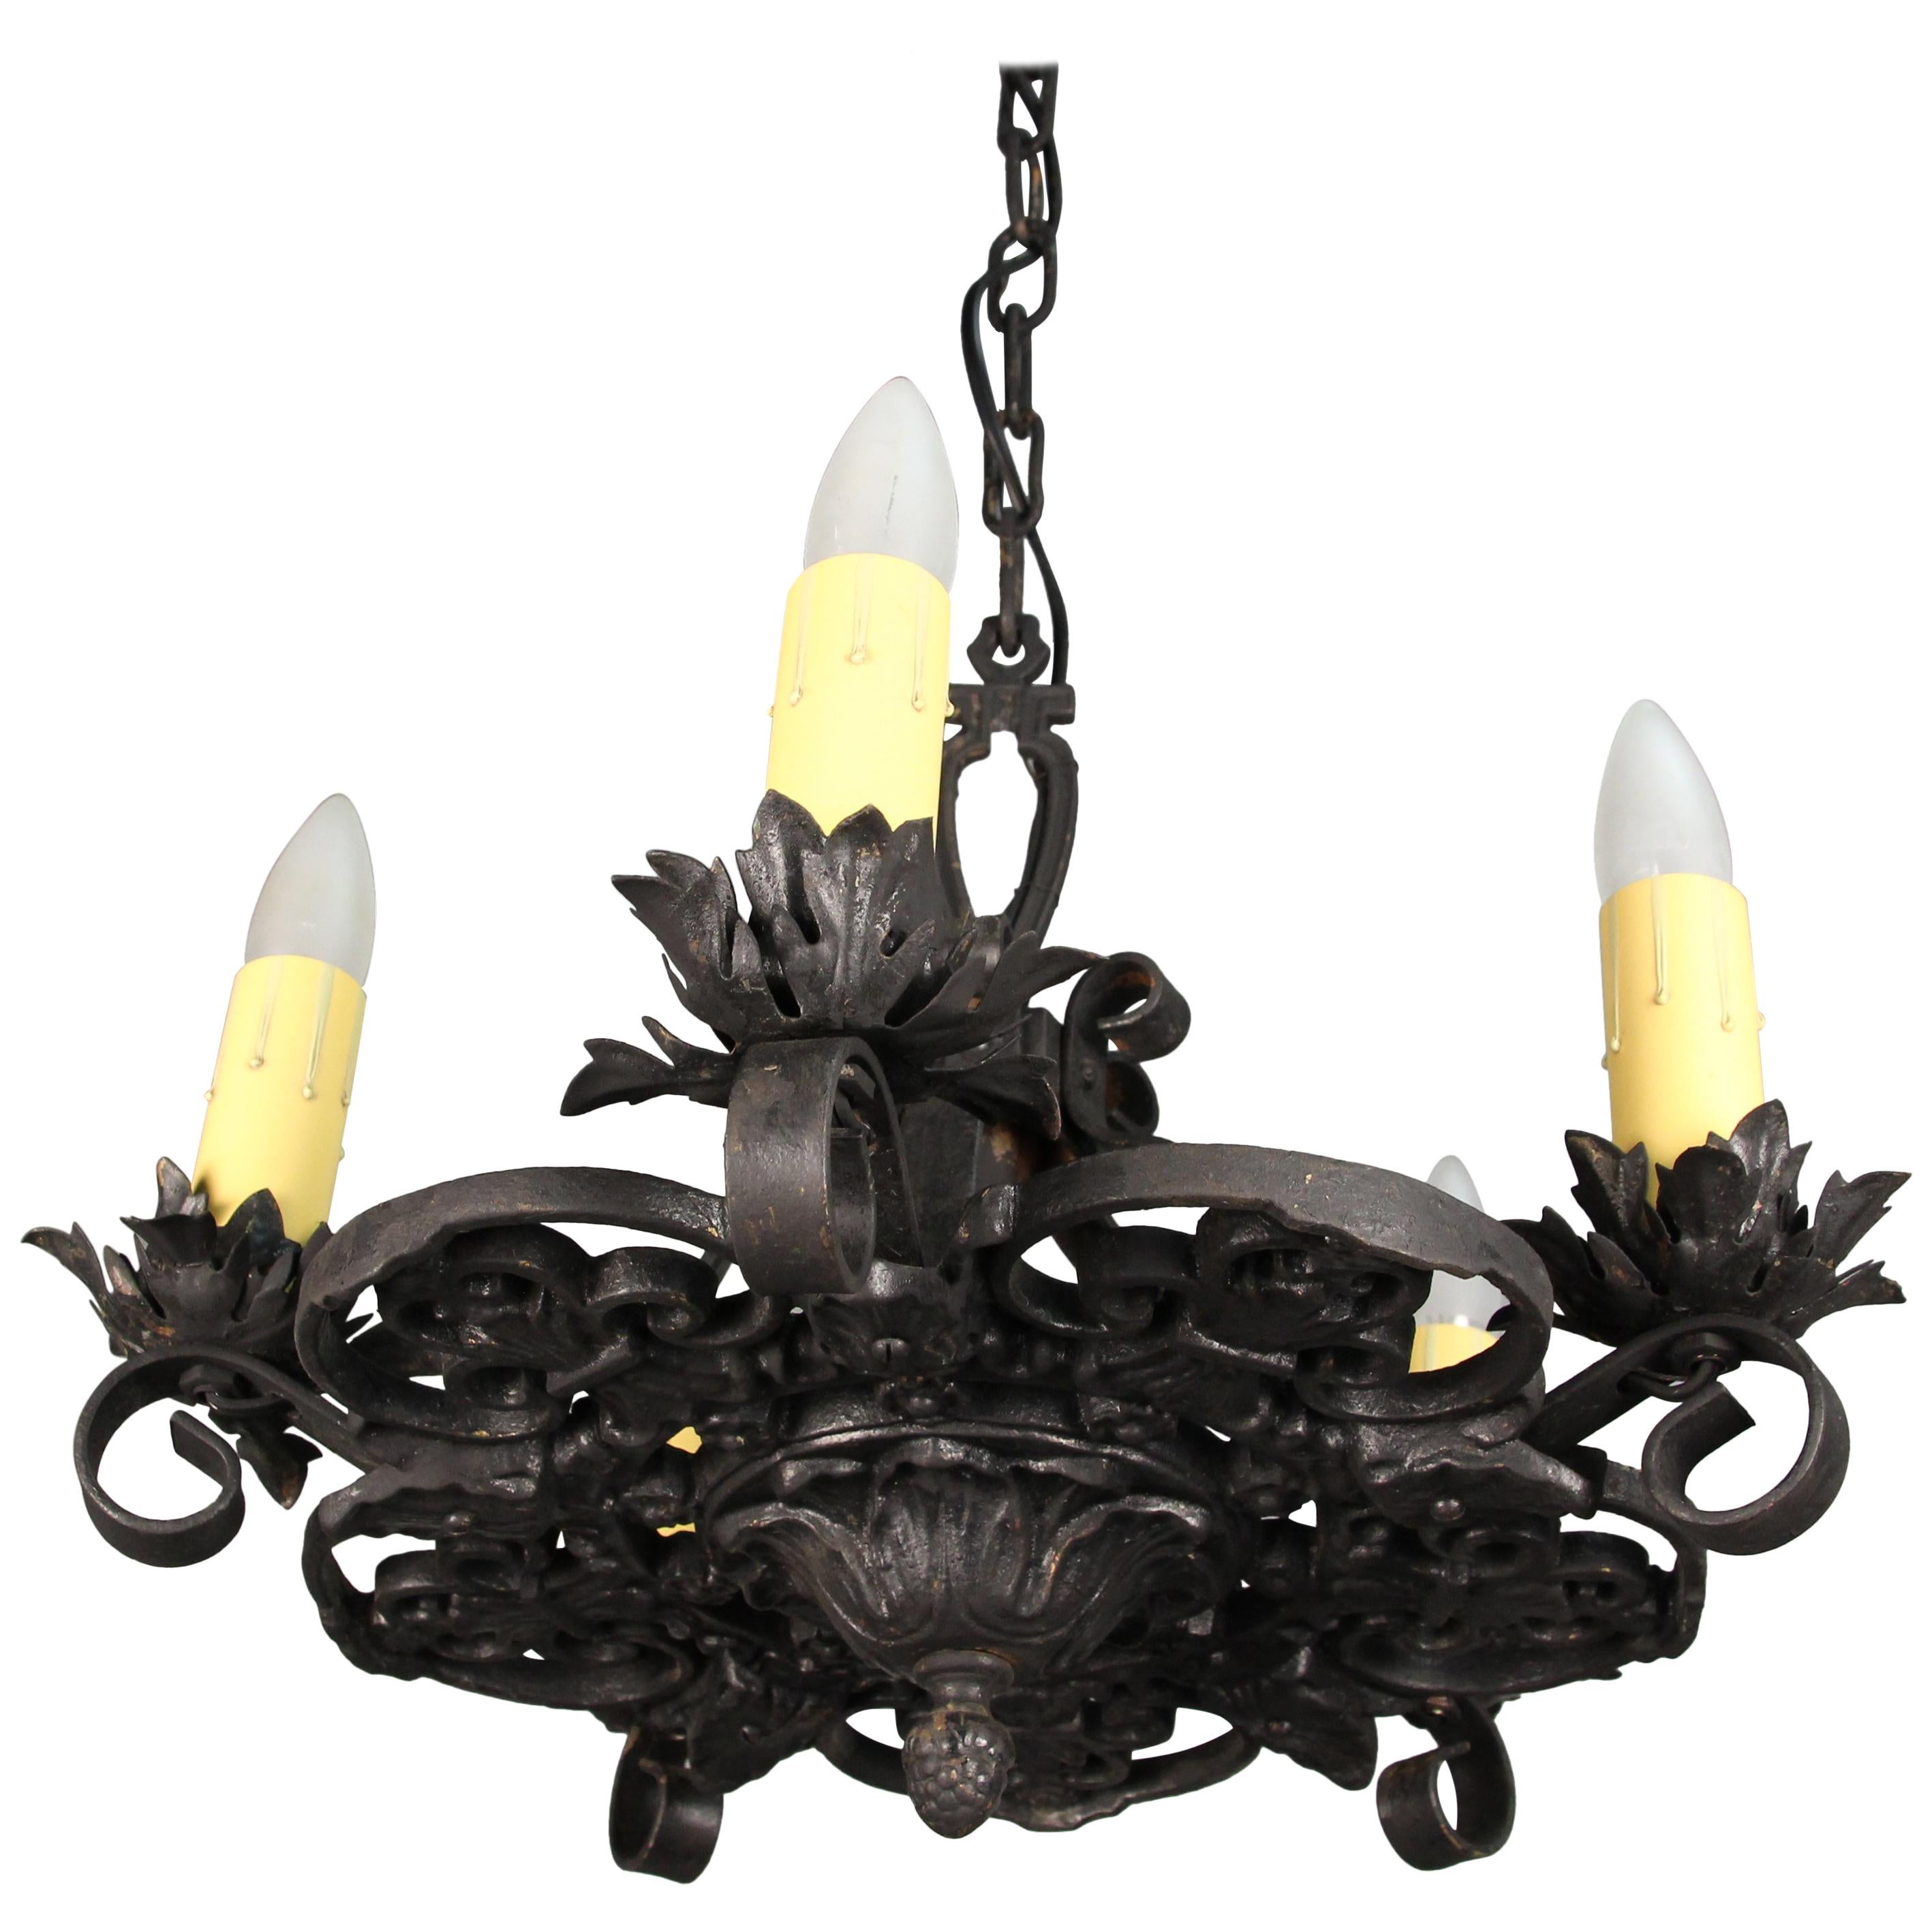 Antique Spanish Revival Iron Chandelier Light with Acanthus Motif